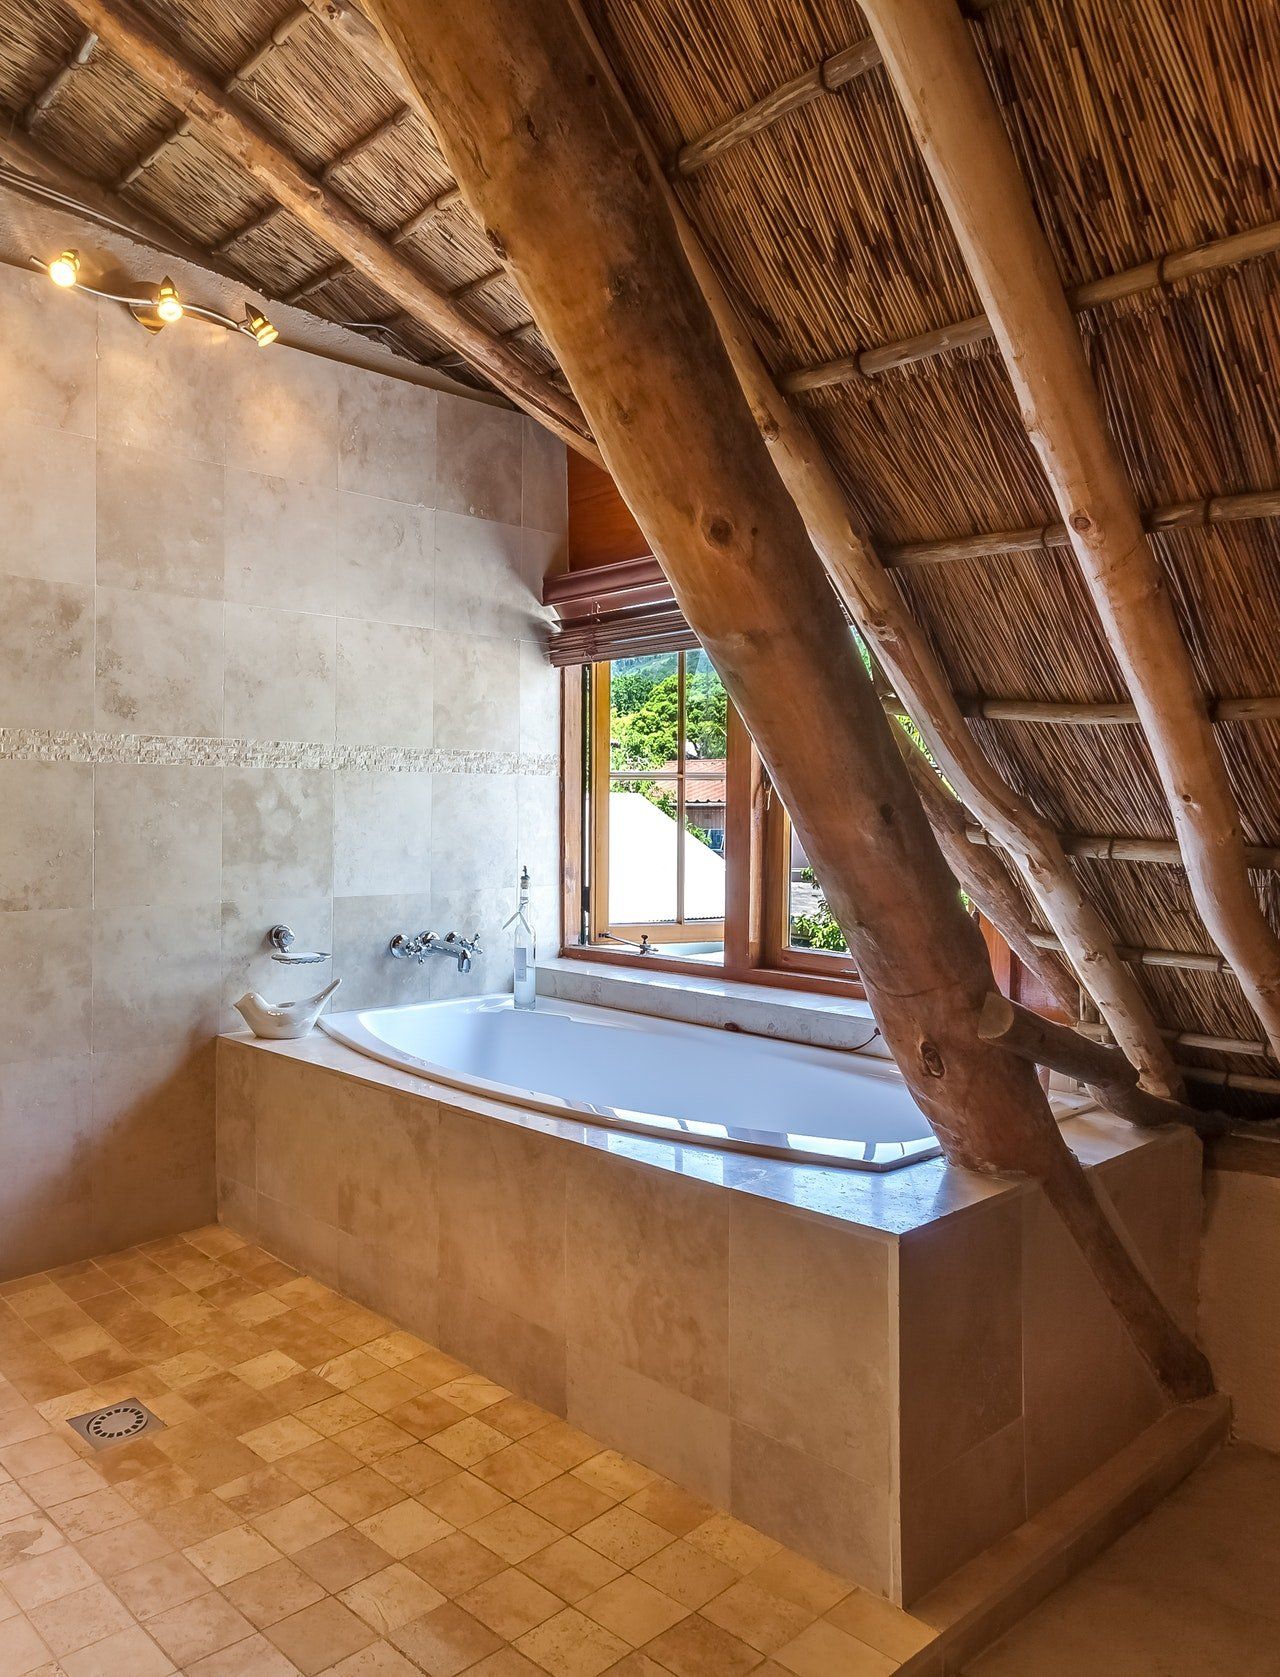 Exposed bamboo in a white stone bathroom